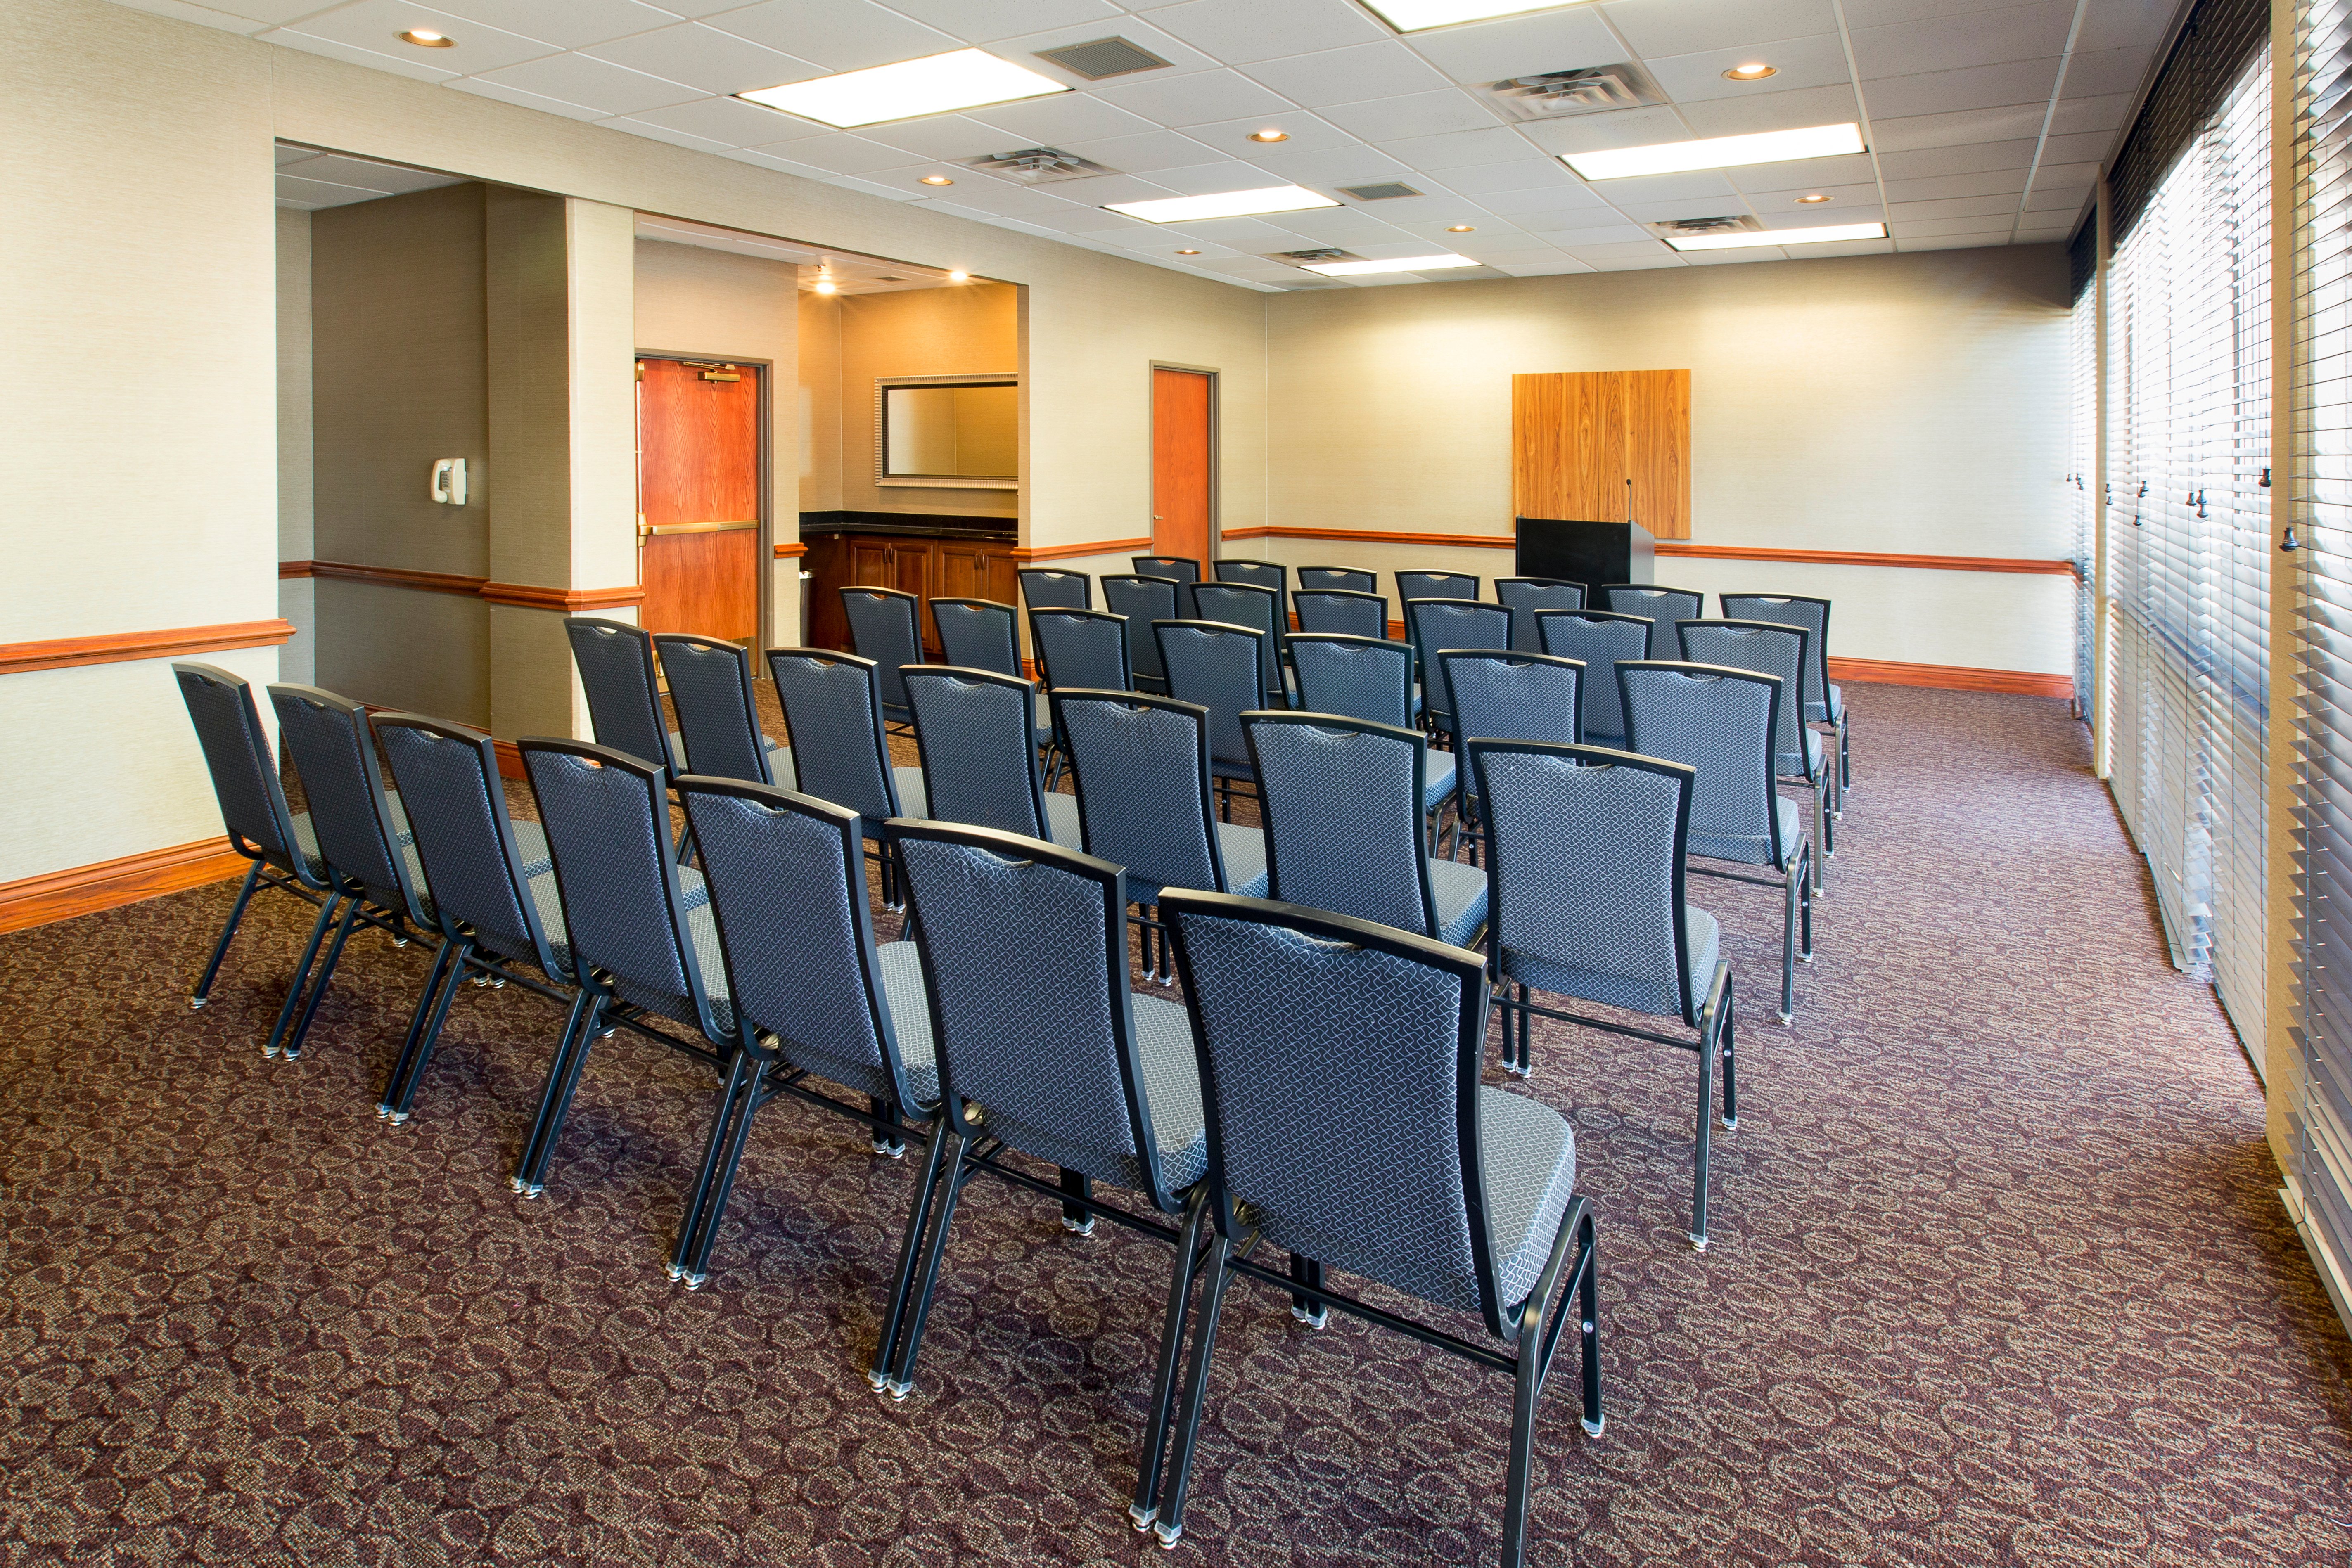 Cascade Room is a great choice for smaller in person meetings